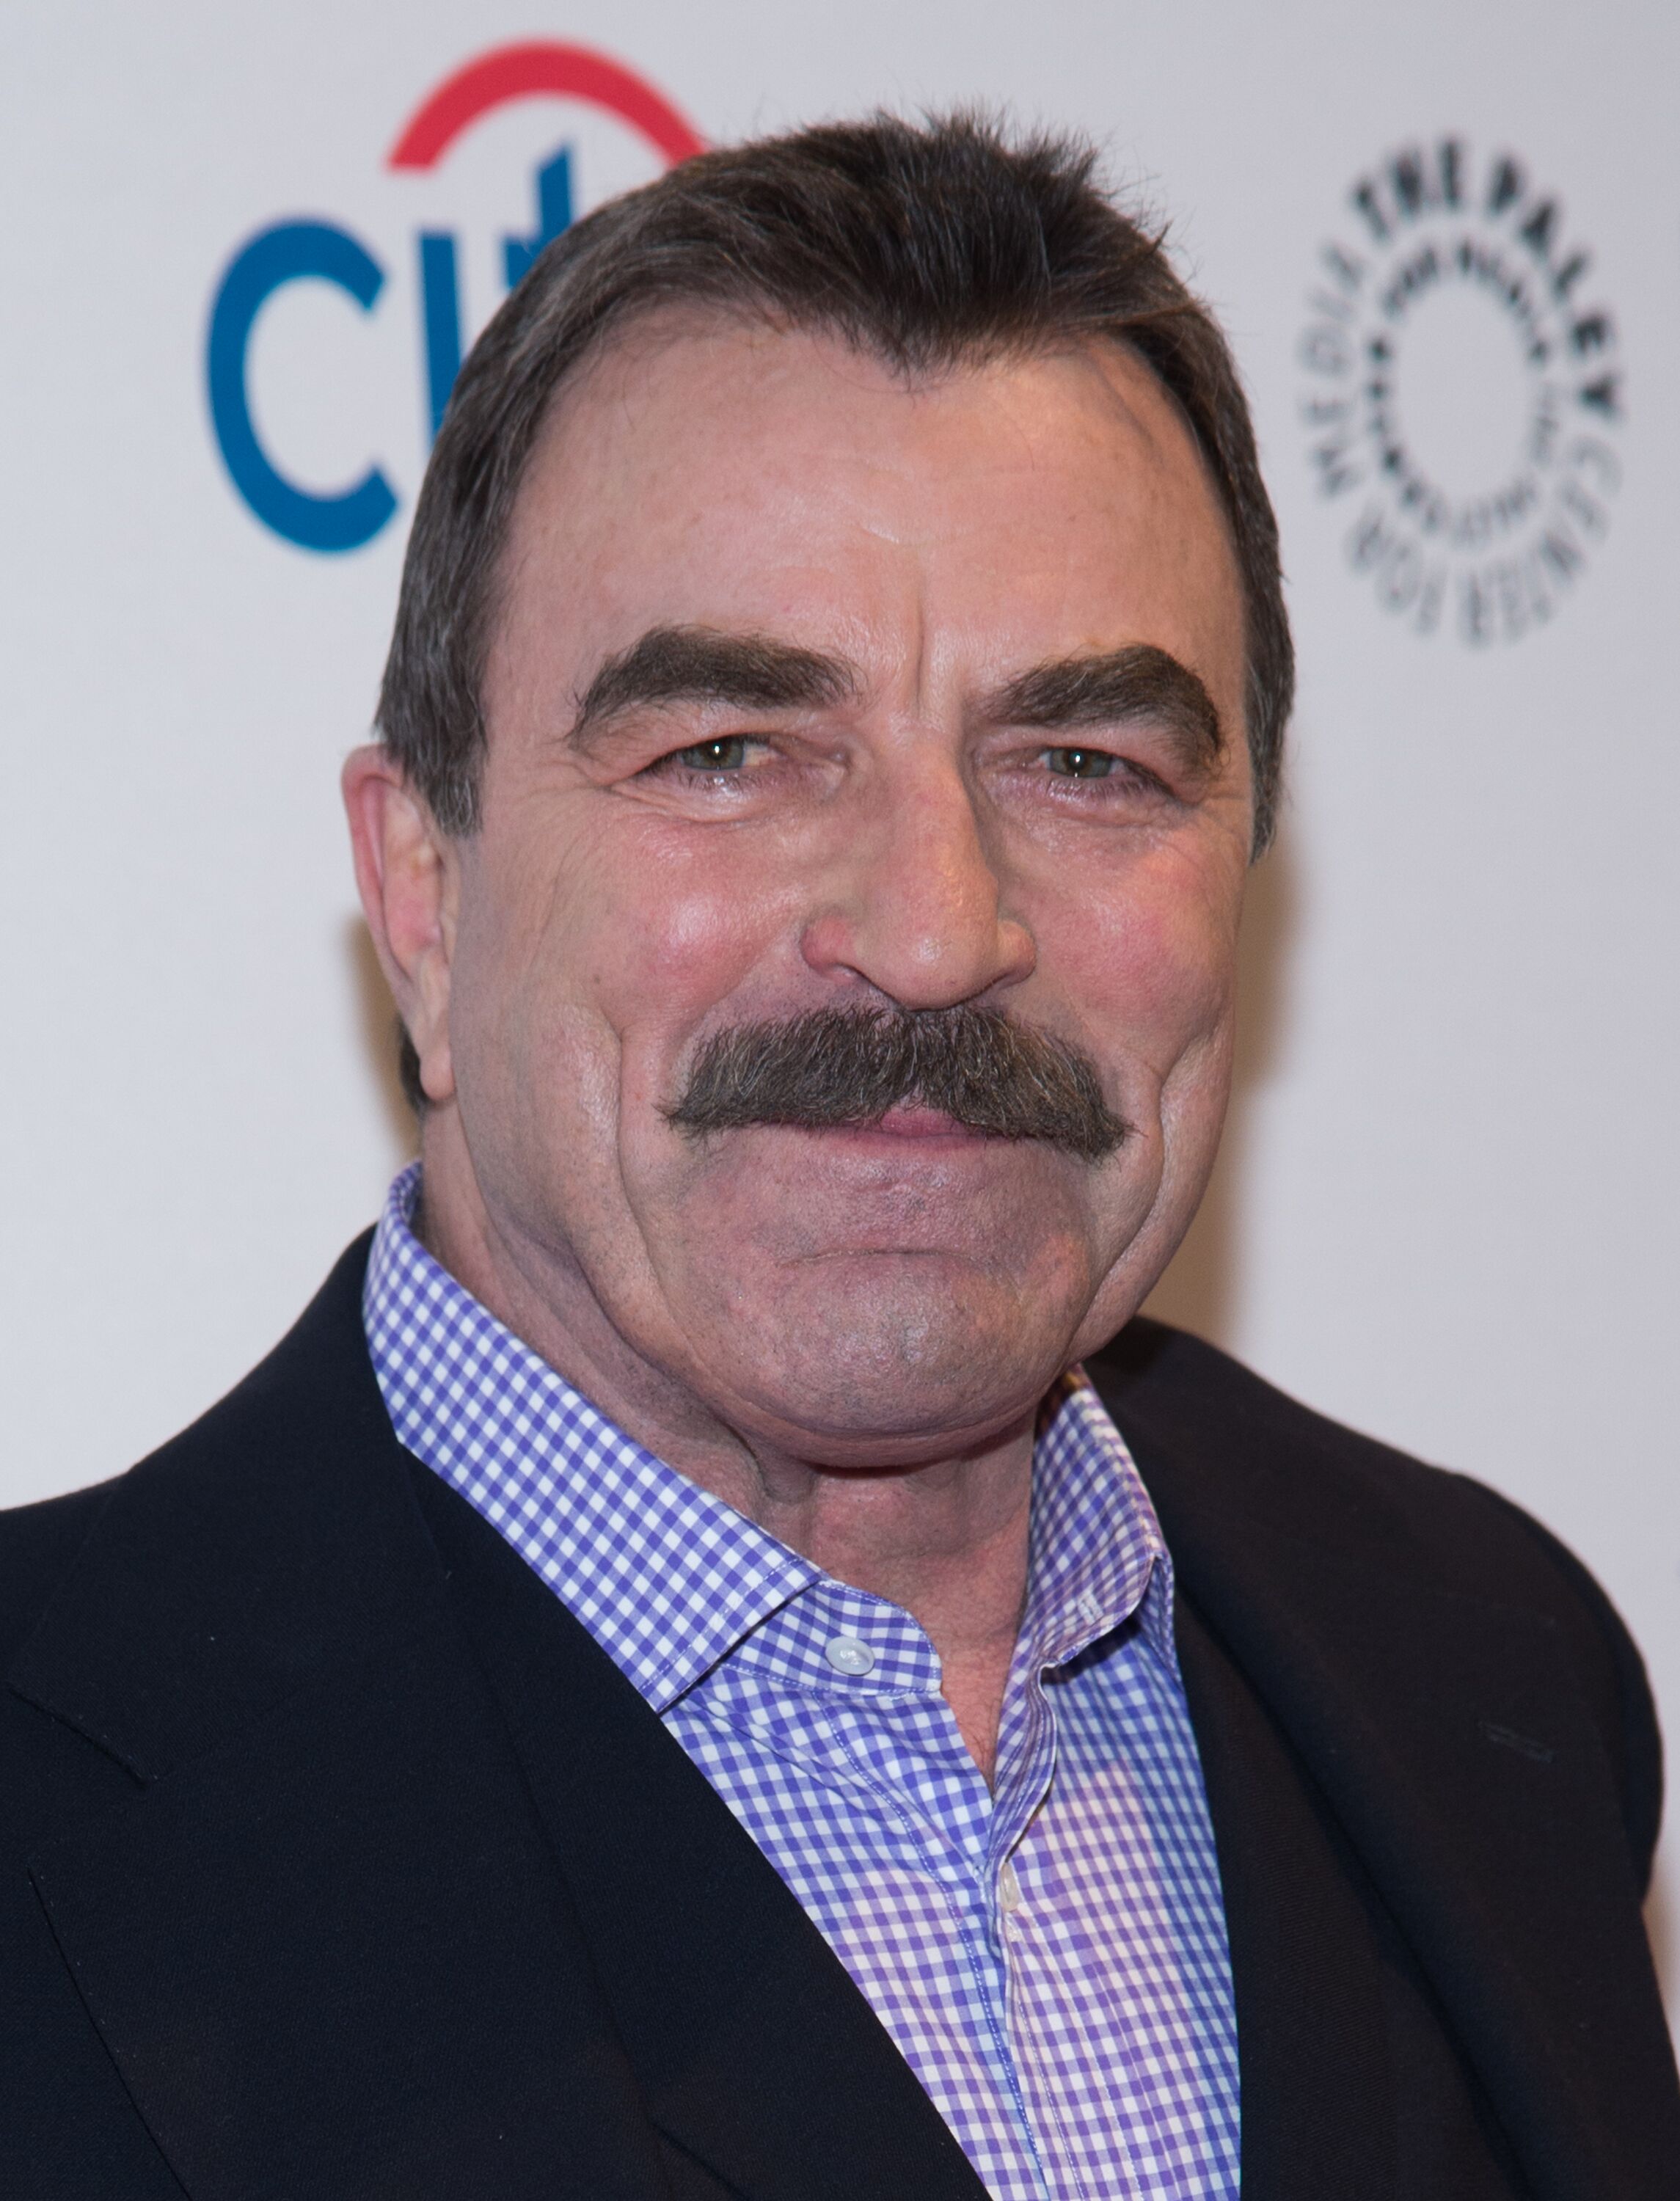 Actor Tom Selleck attends the 2nd Annual Paleyfest of "Blue Bloods" at the Paley Center For Media on October 18, 2014 in New York, New York. | Photo: Getty Images